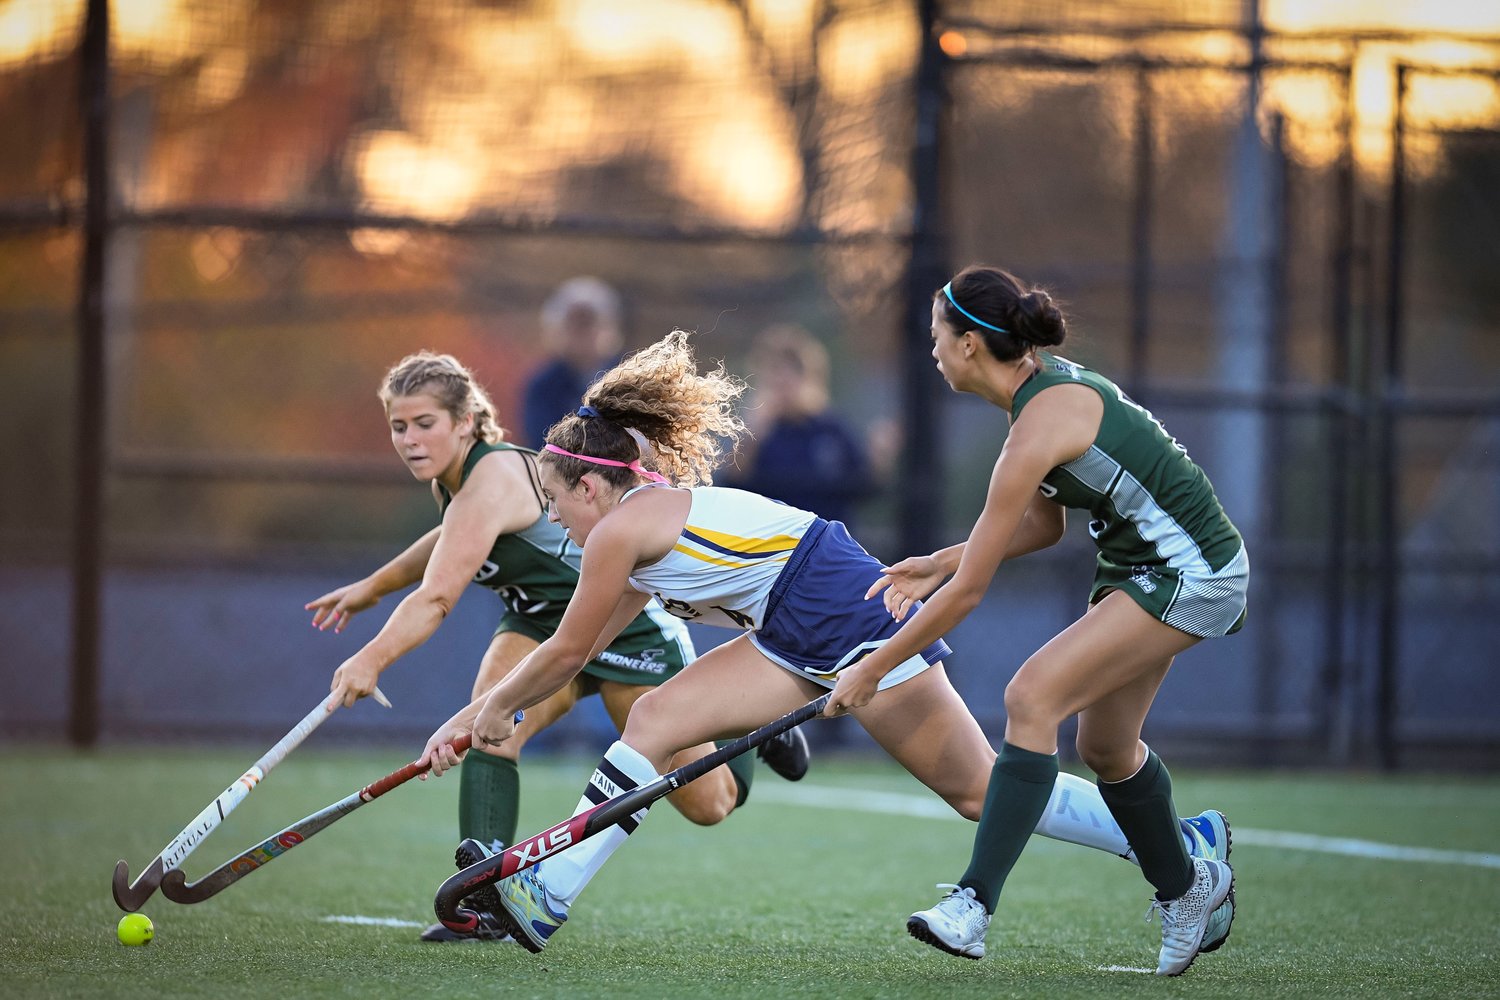 New Hope-Solebury’s Sophia Cozza splits the defense of Dock chasing after a loose ball.